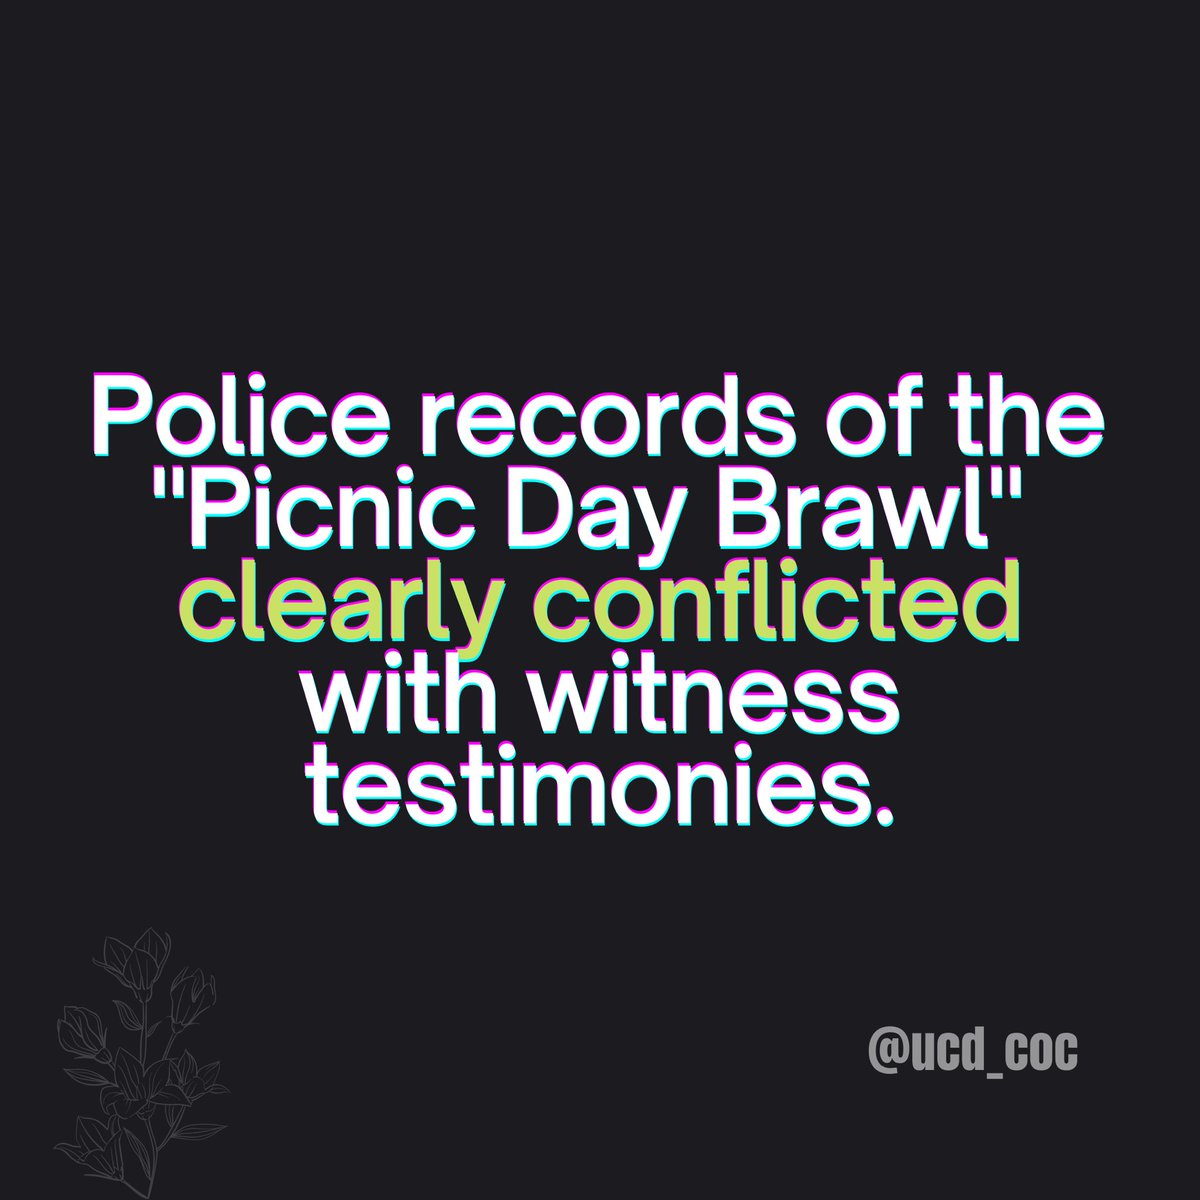 Police records clearly conflicted with witness testimonies.